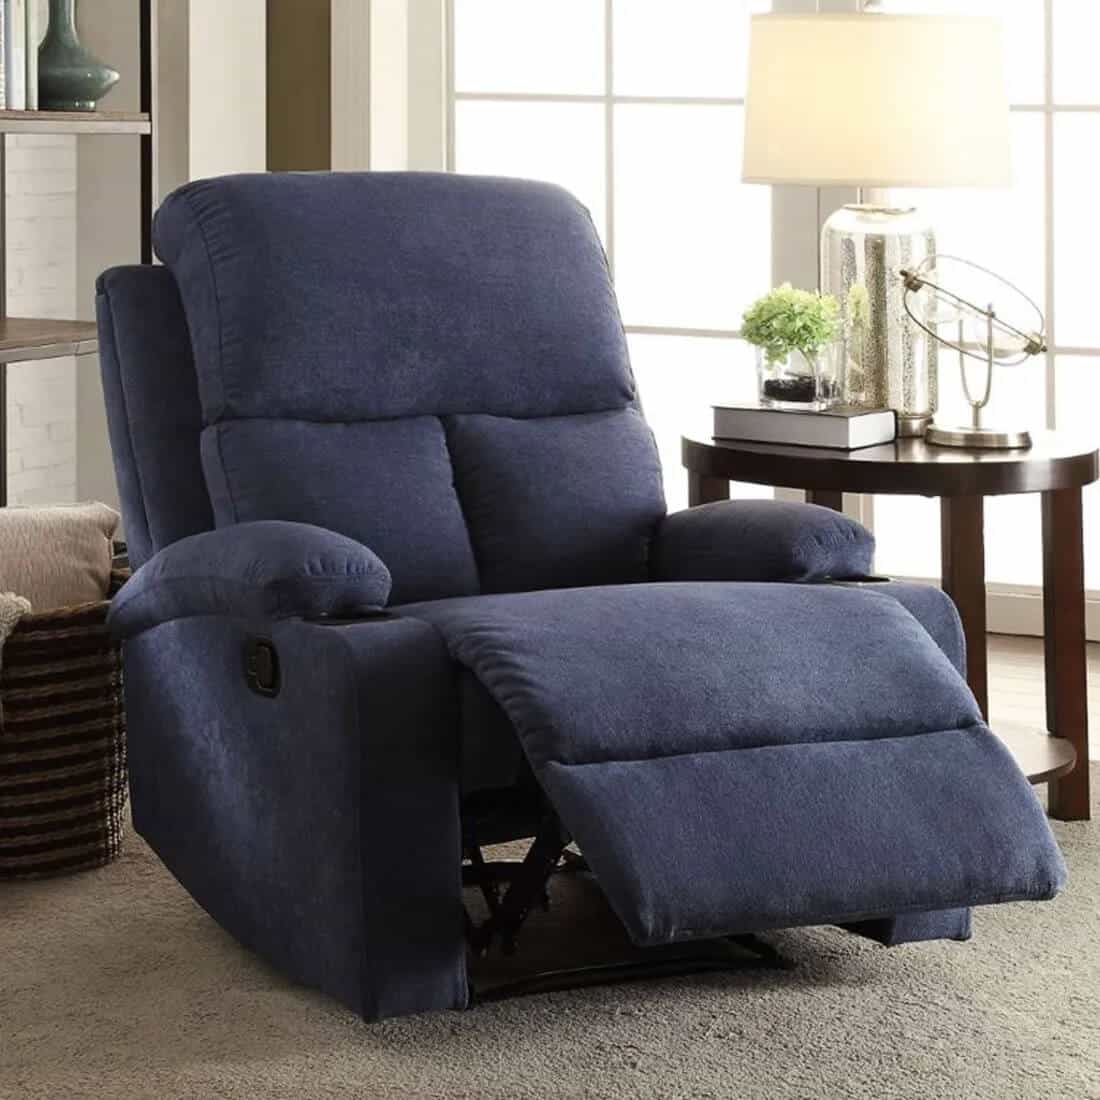 blue recliner in a home setting with a brown side stand, lamp and a house plant